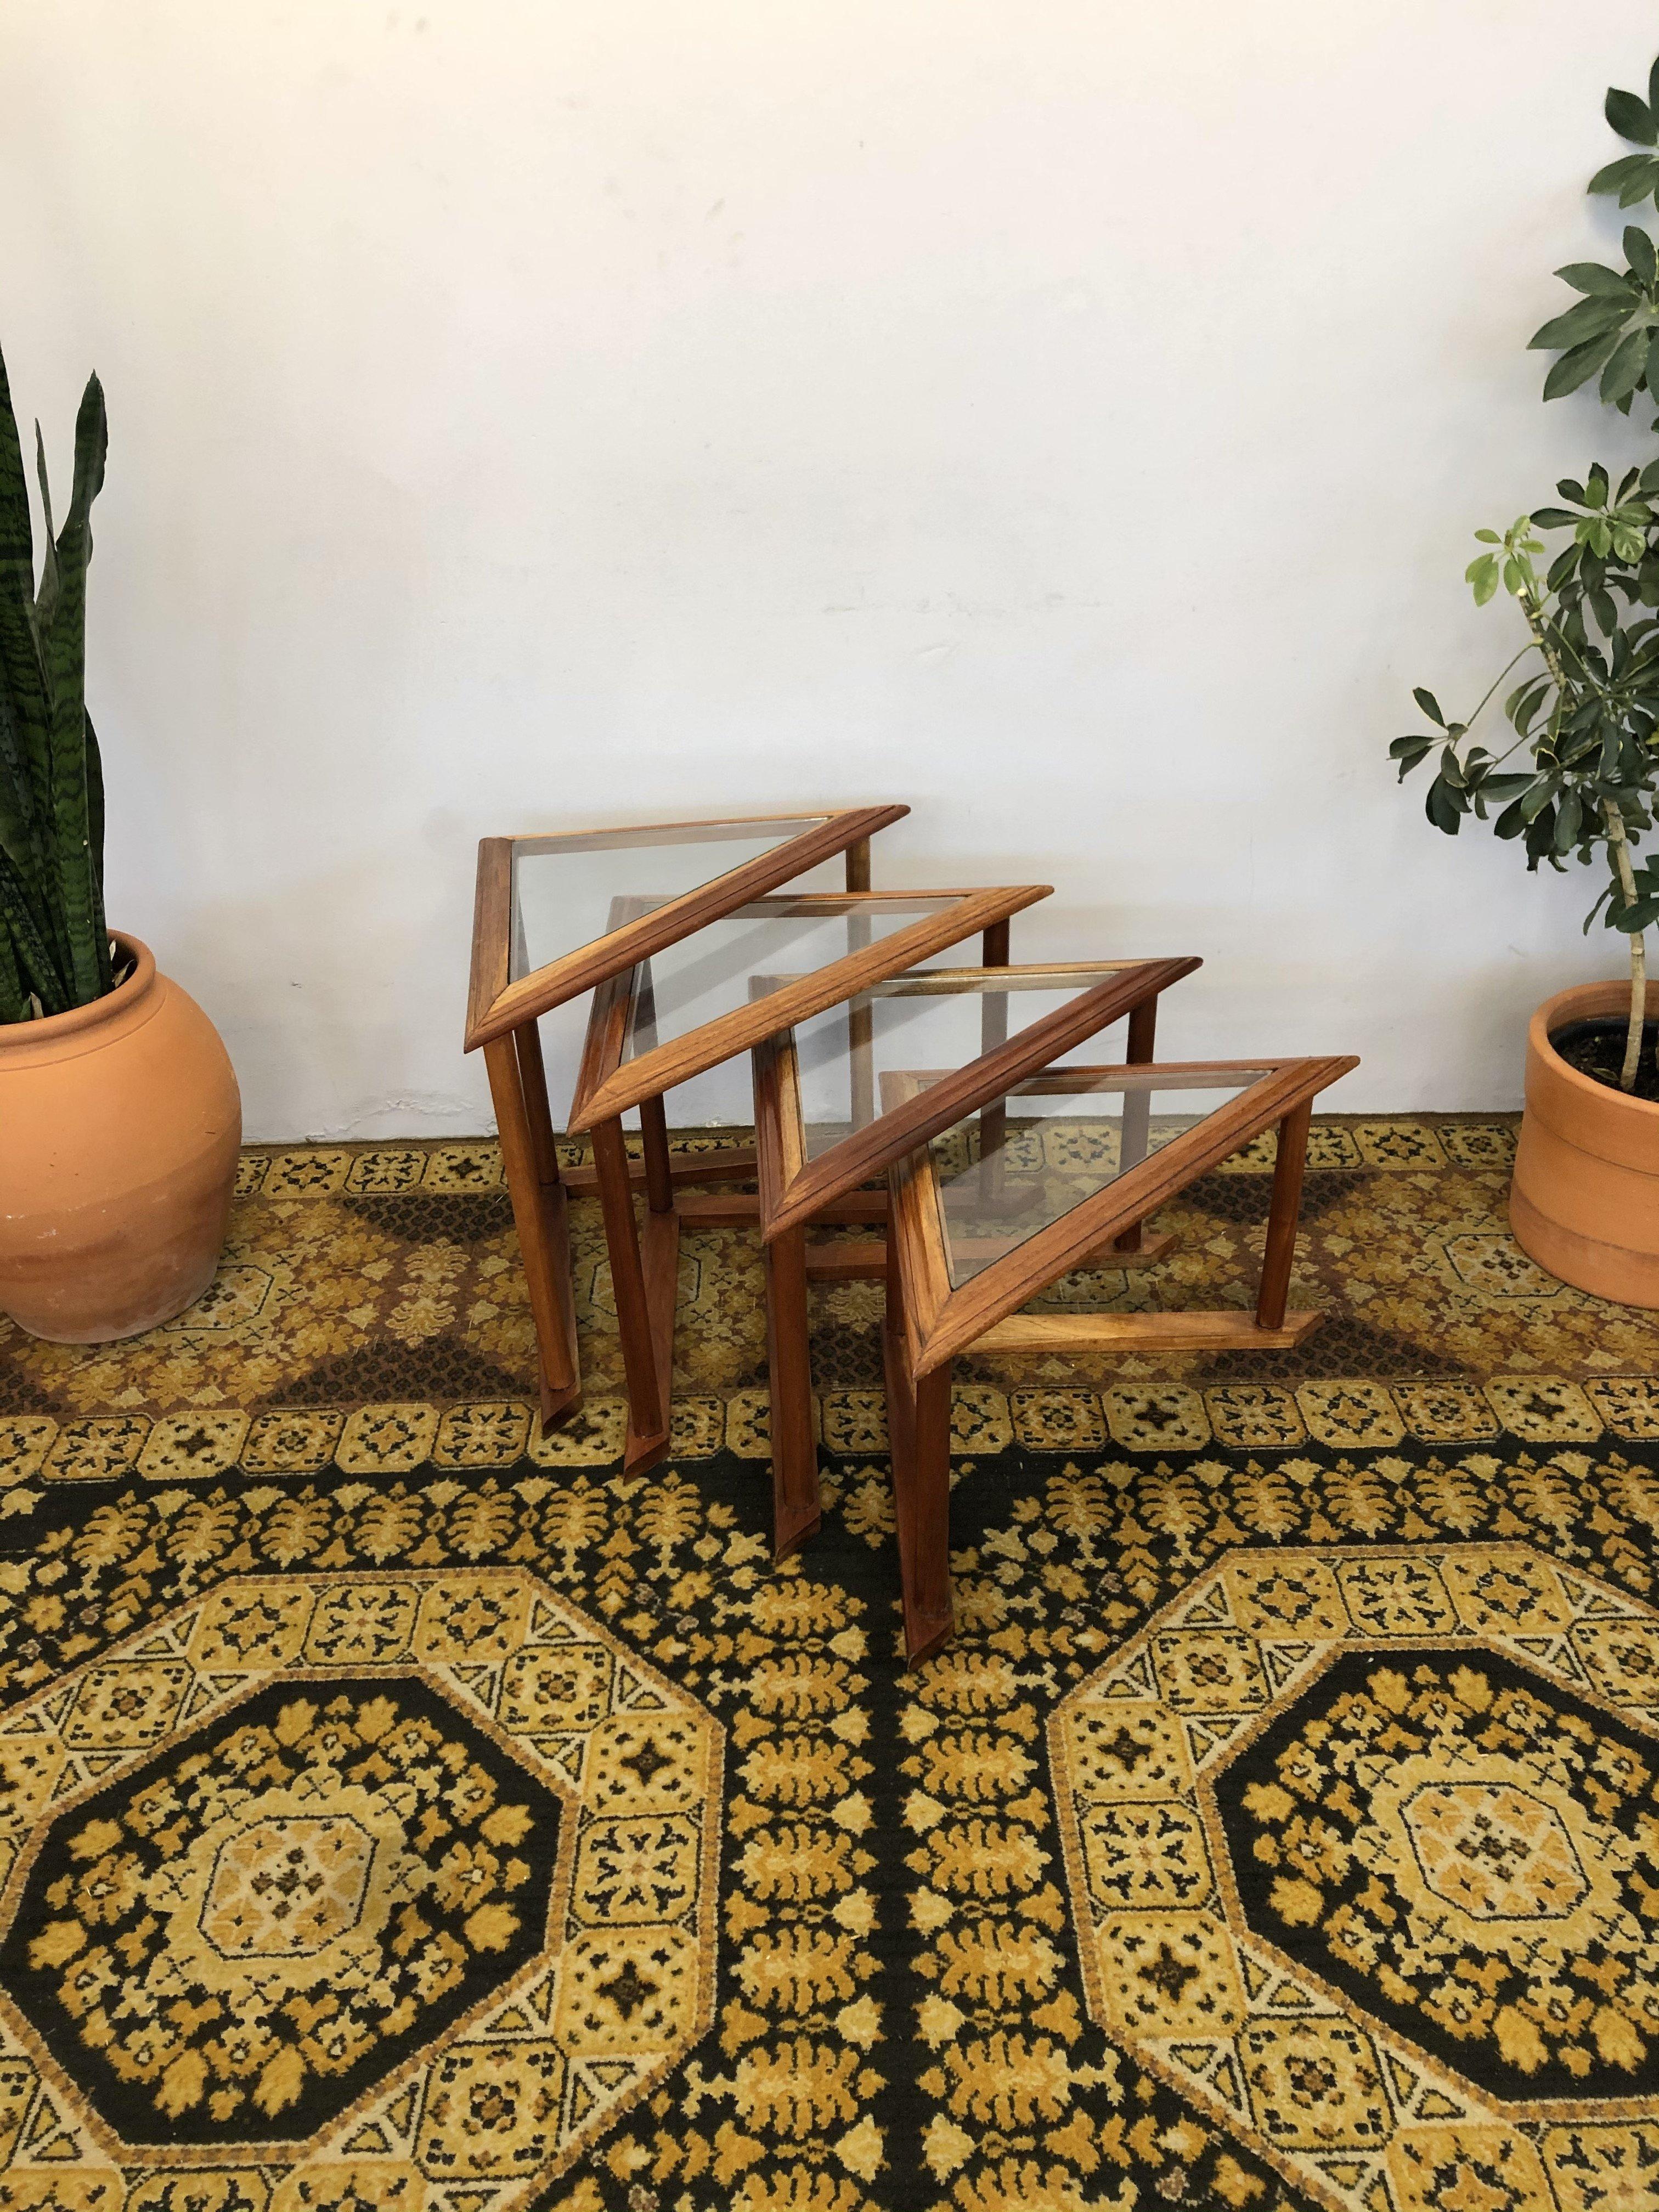 Set of 4 Mid-Century Modern Brazilian Nesting tables in solid wood (recently refinished) with glass top. Tops are removable. Wood has natural color variations. Firm and resistant structure. In great condition.

Approximate Measures from Largest to